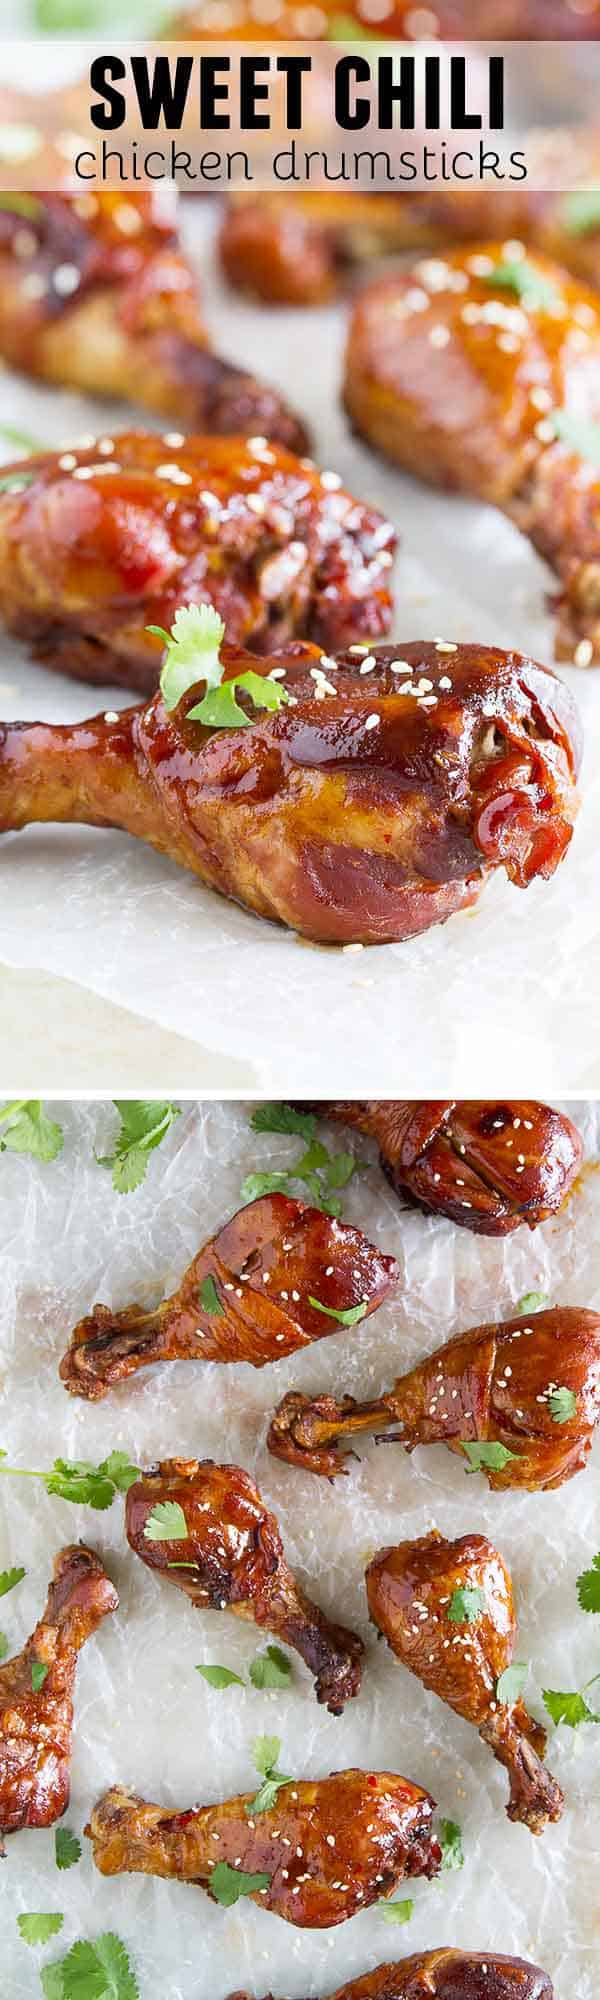 Slow Cooker Sweet Chili Chicken Drumsticks - Taste and Tell